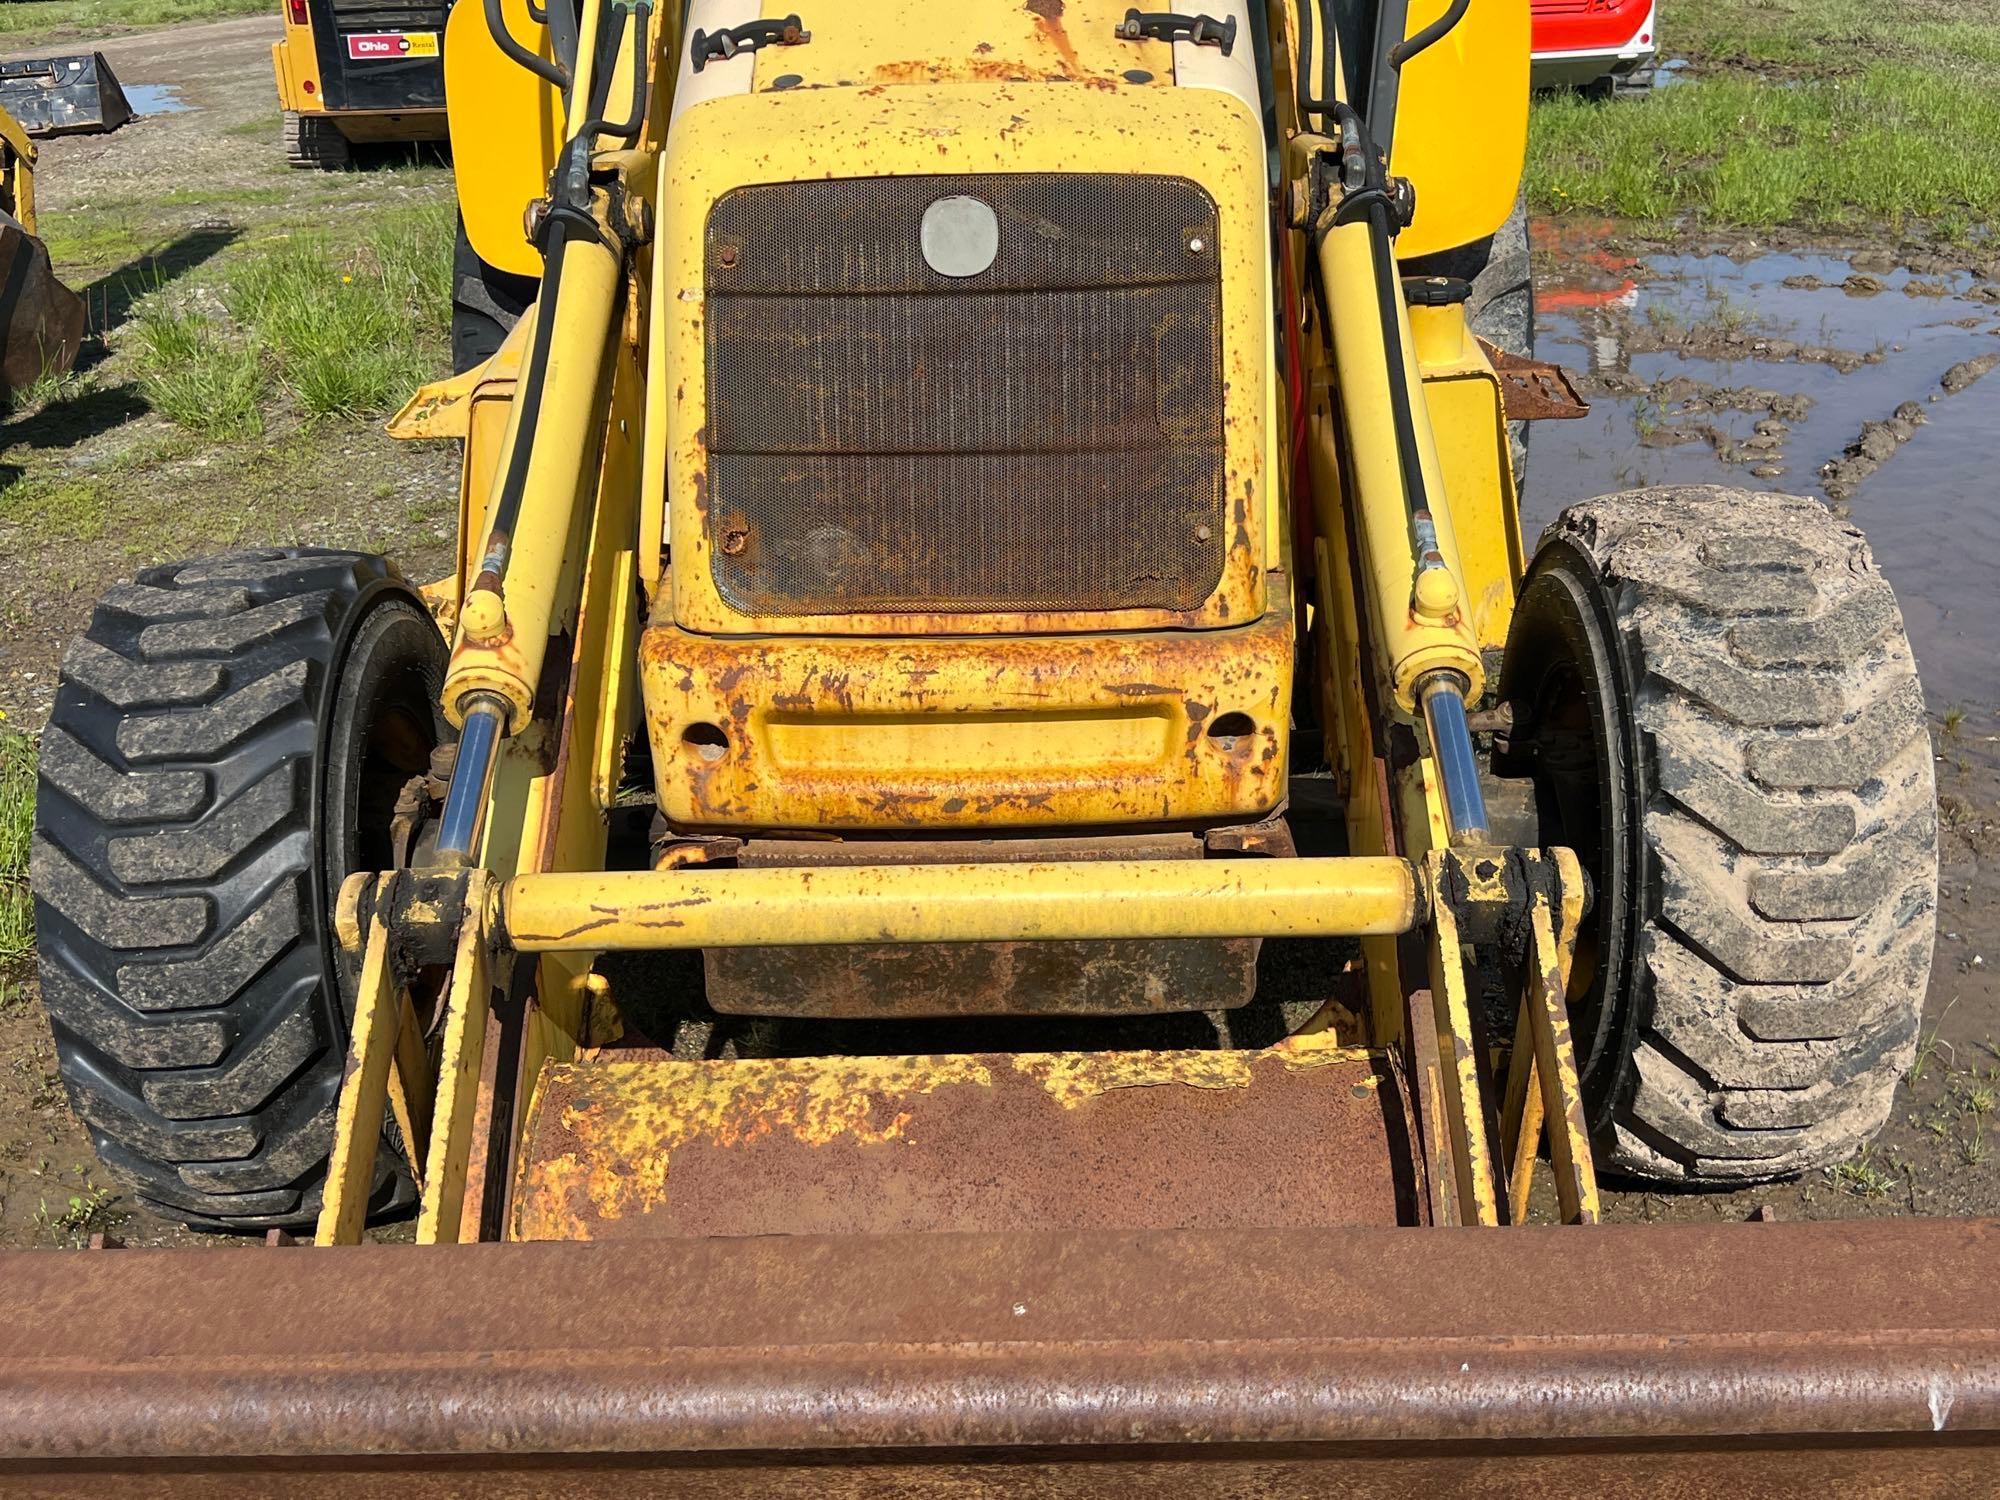 NEW HOLLAND LB75 TRACTOR LOADER BACKHOE SN:031049792 4x4, powered by diesel engine, equipped with